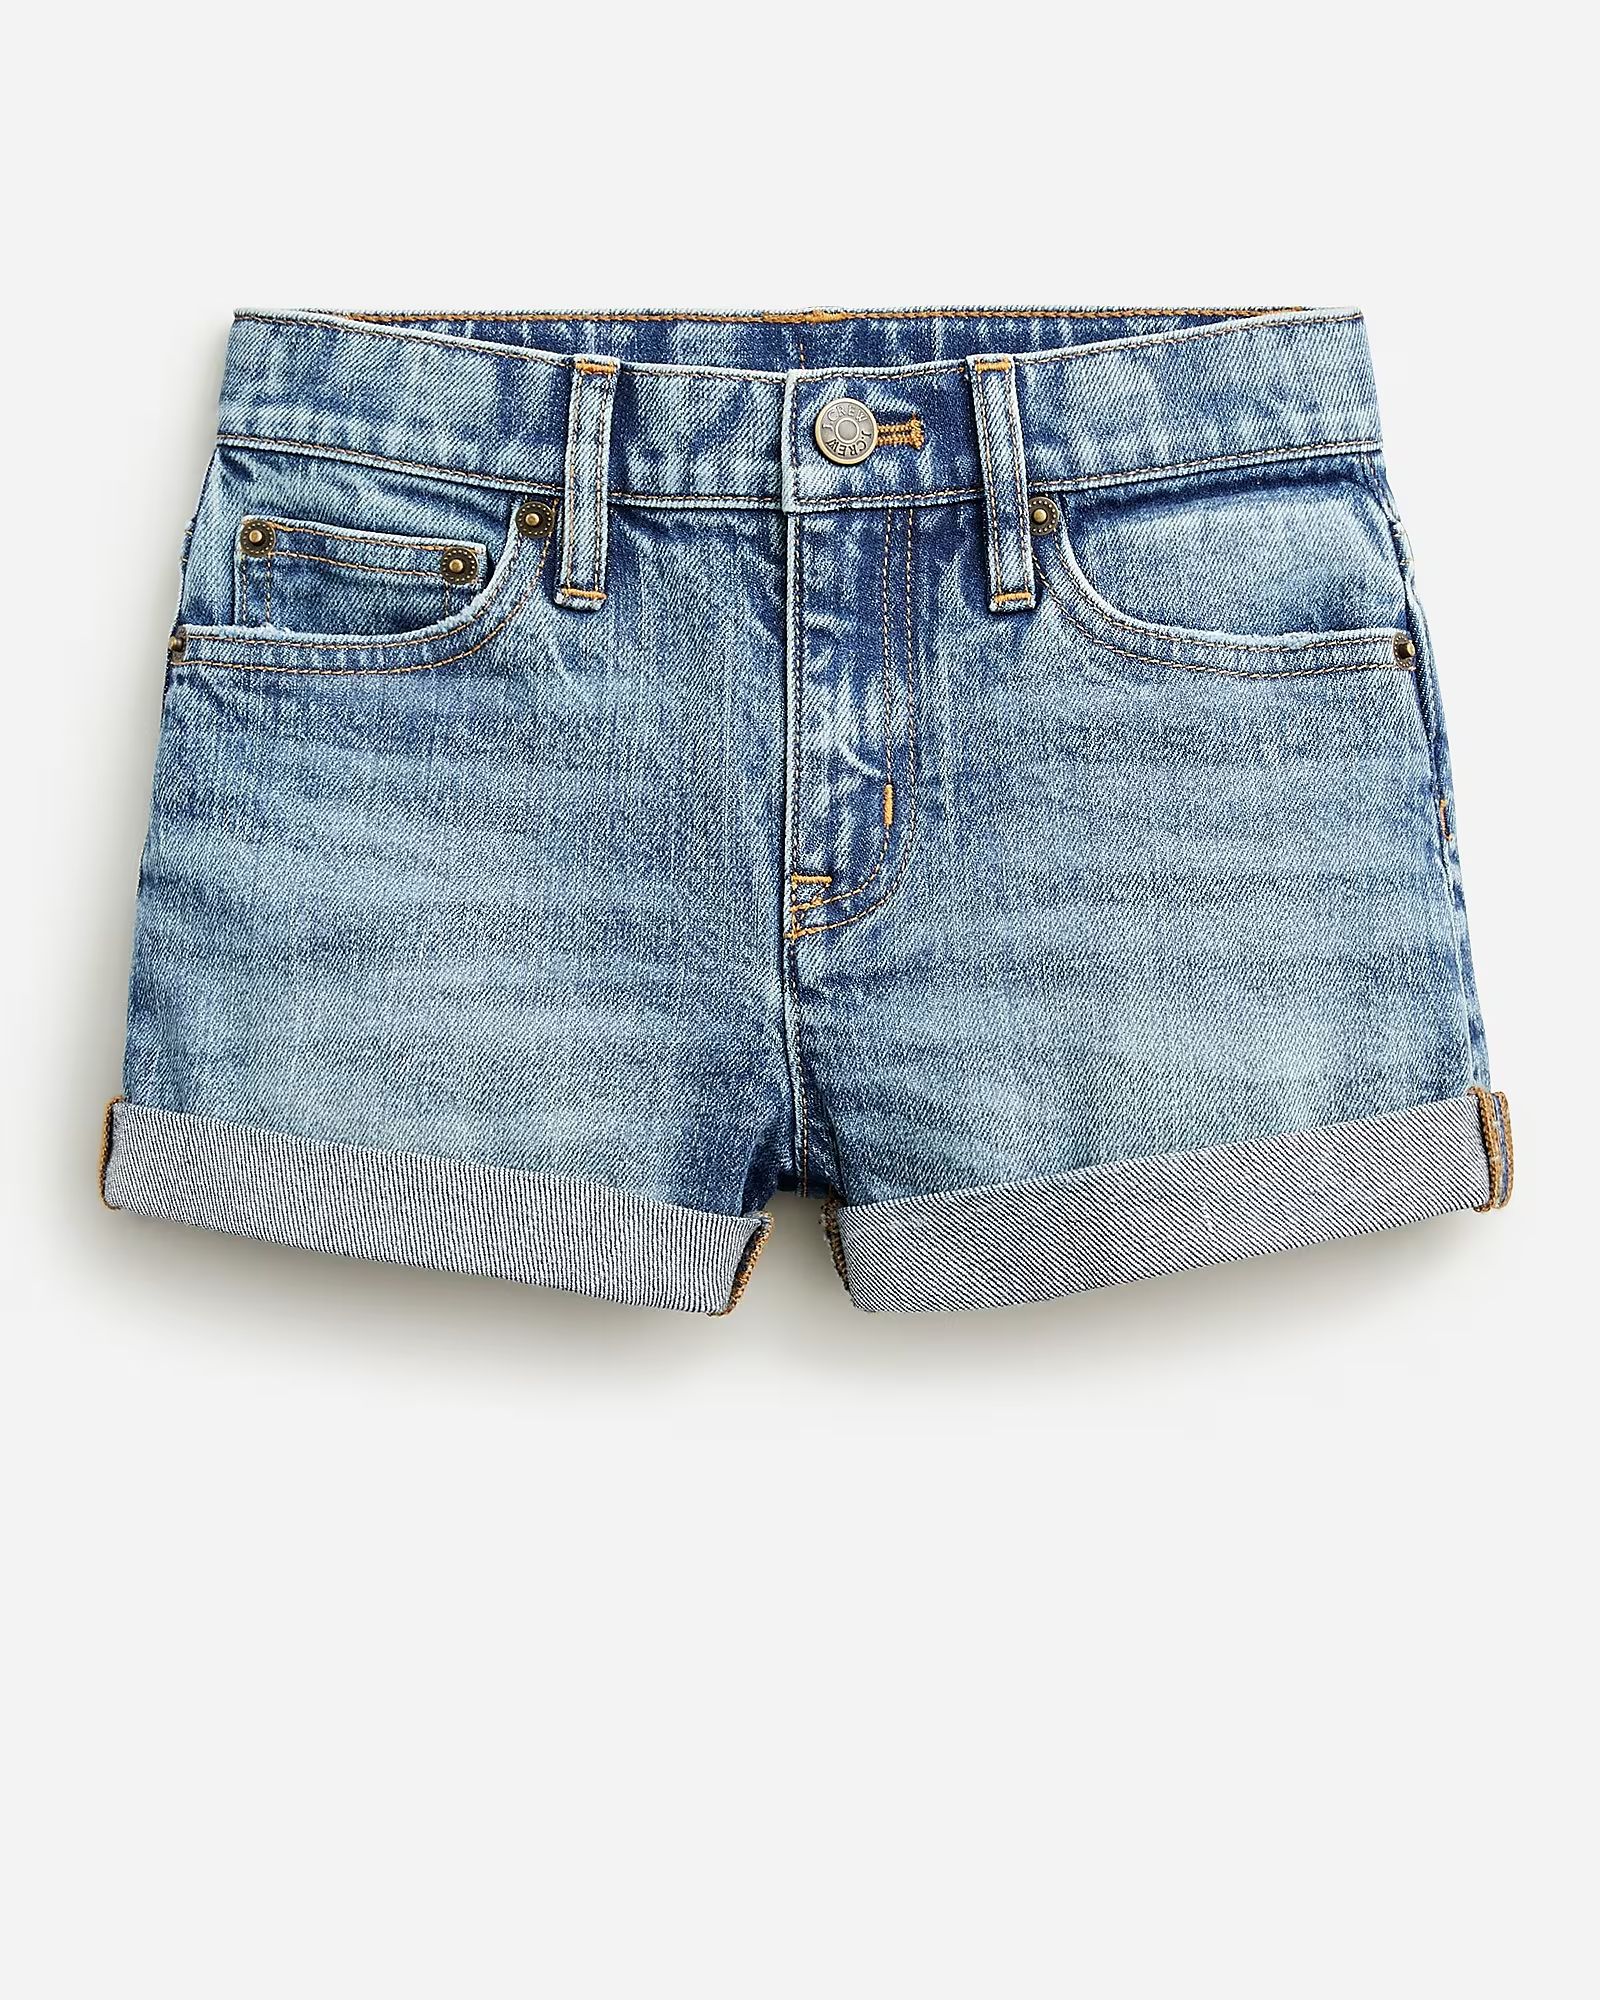 top rated5.0(6 REVIEWS)Girls' cuffed denim short in island wash$24.50-$39.50$49.50Limited time. P... | J.Crew US